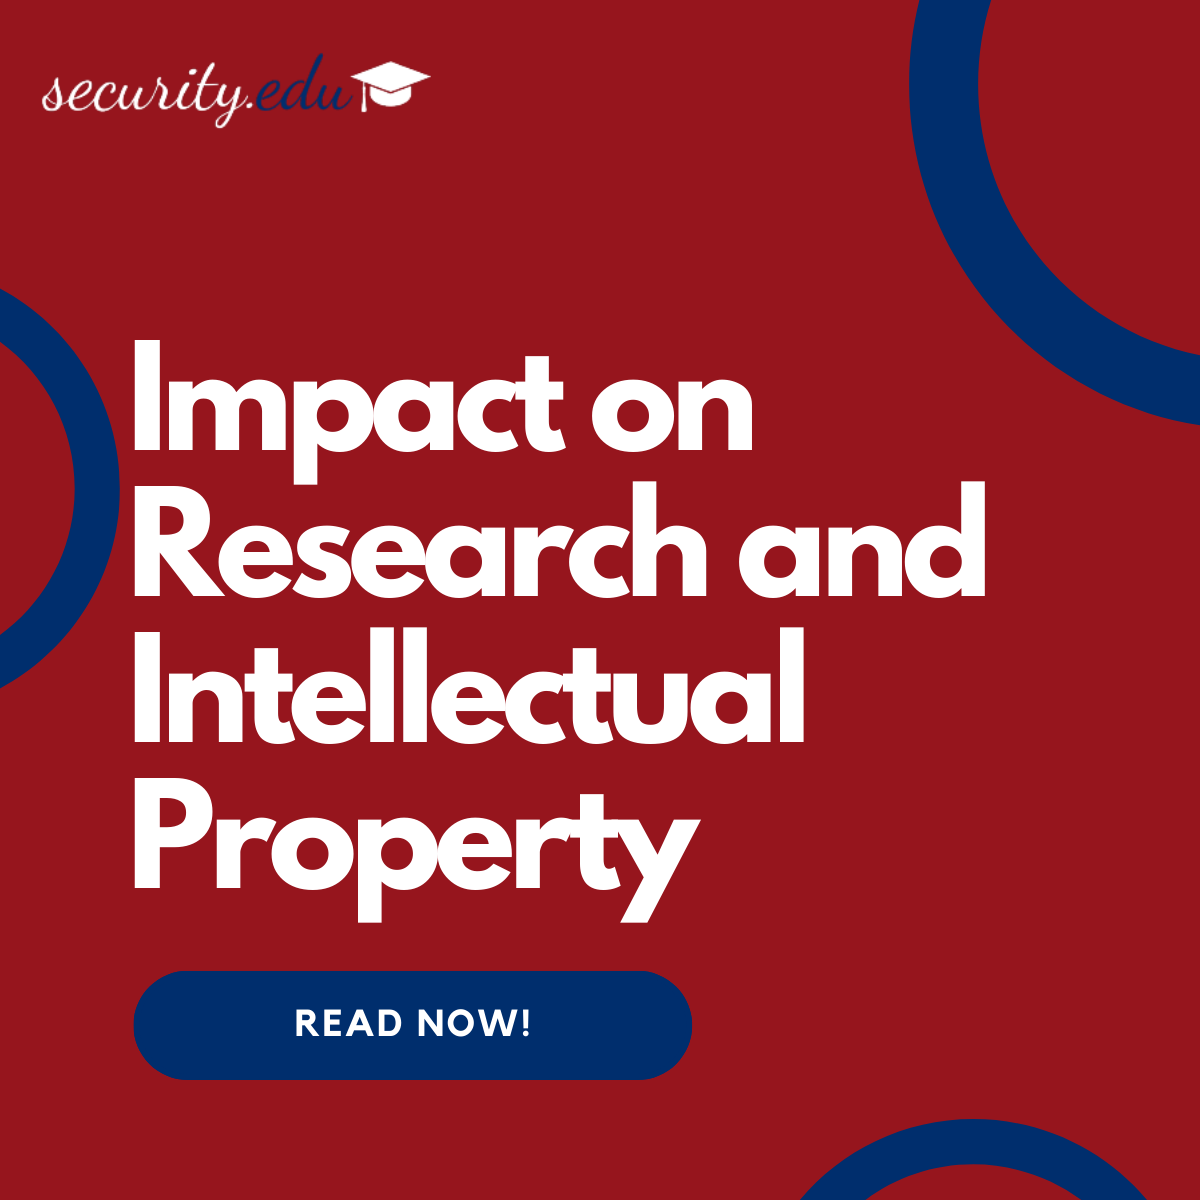 Impact on Research and Intellectual Property - Cybersecurity Breaches in Schools and Universities